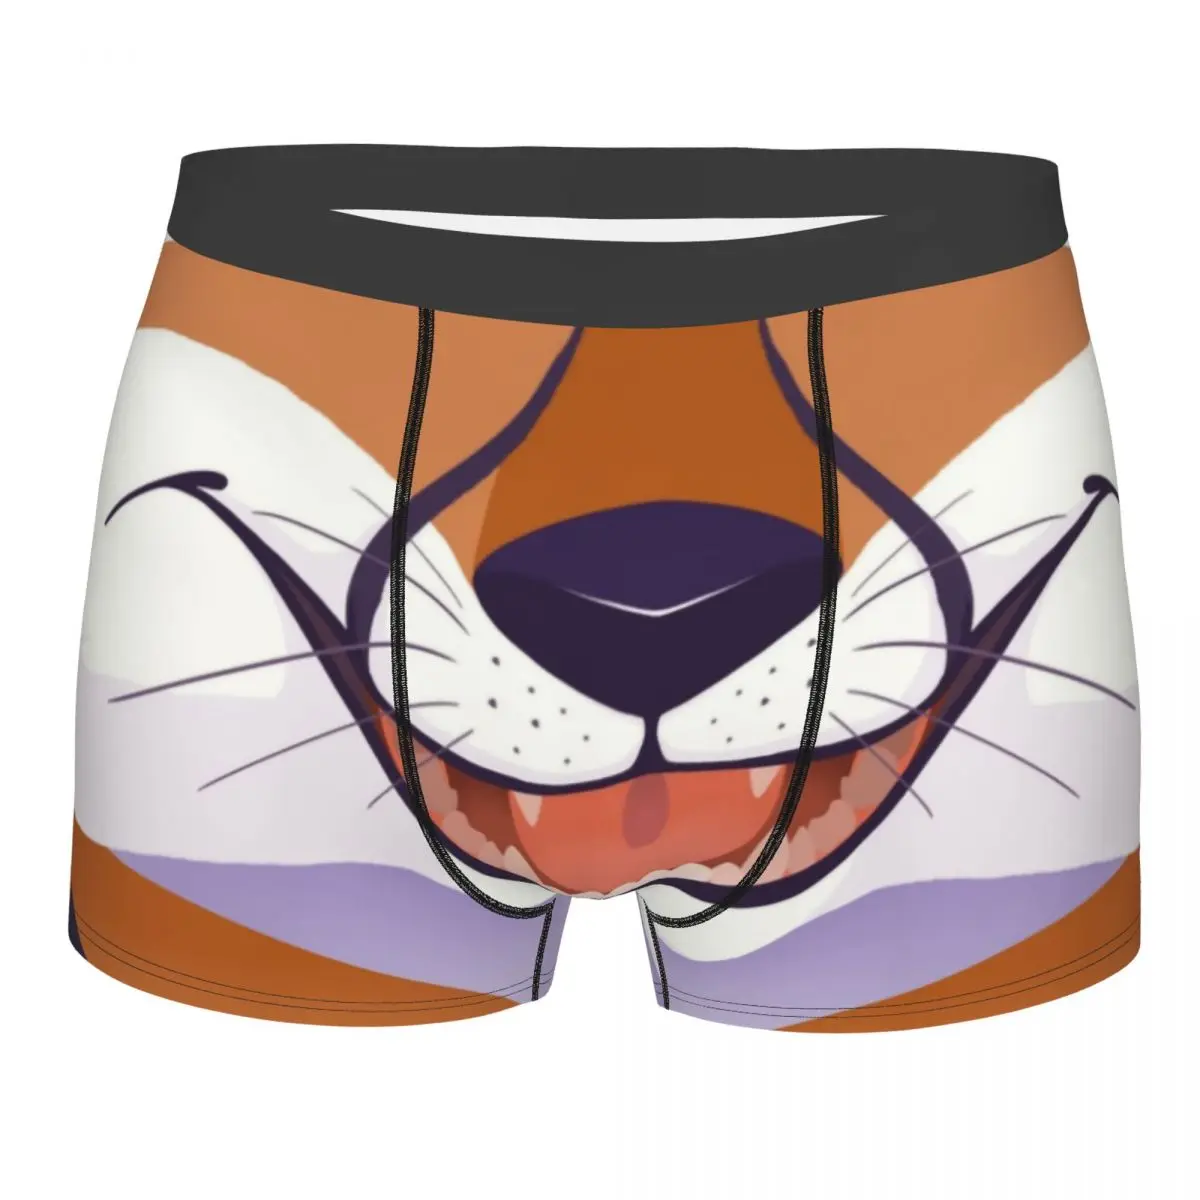 

Novelty Fox Maw Boxers Shorts Panties Men's Underpants Stretch Animal Pattern 3D Printing Briefs Underwear